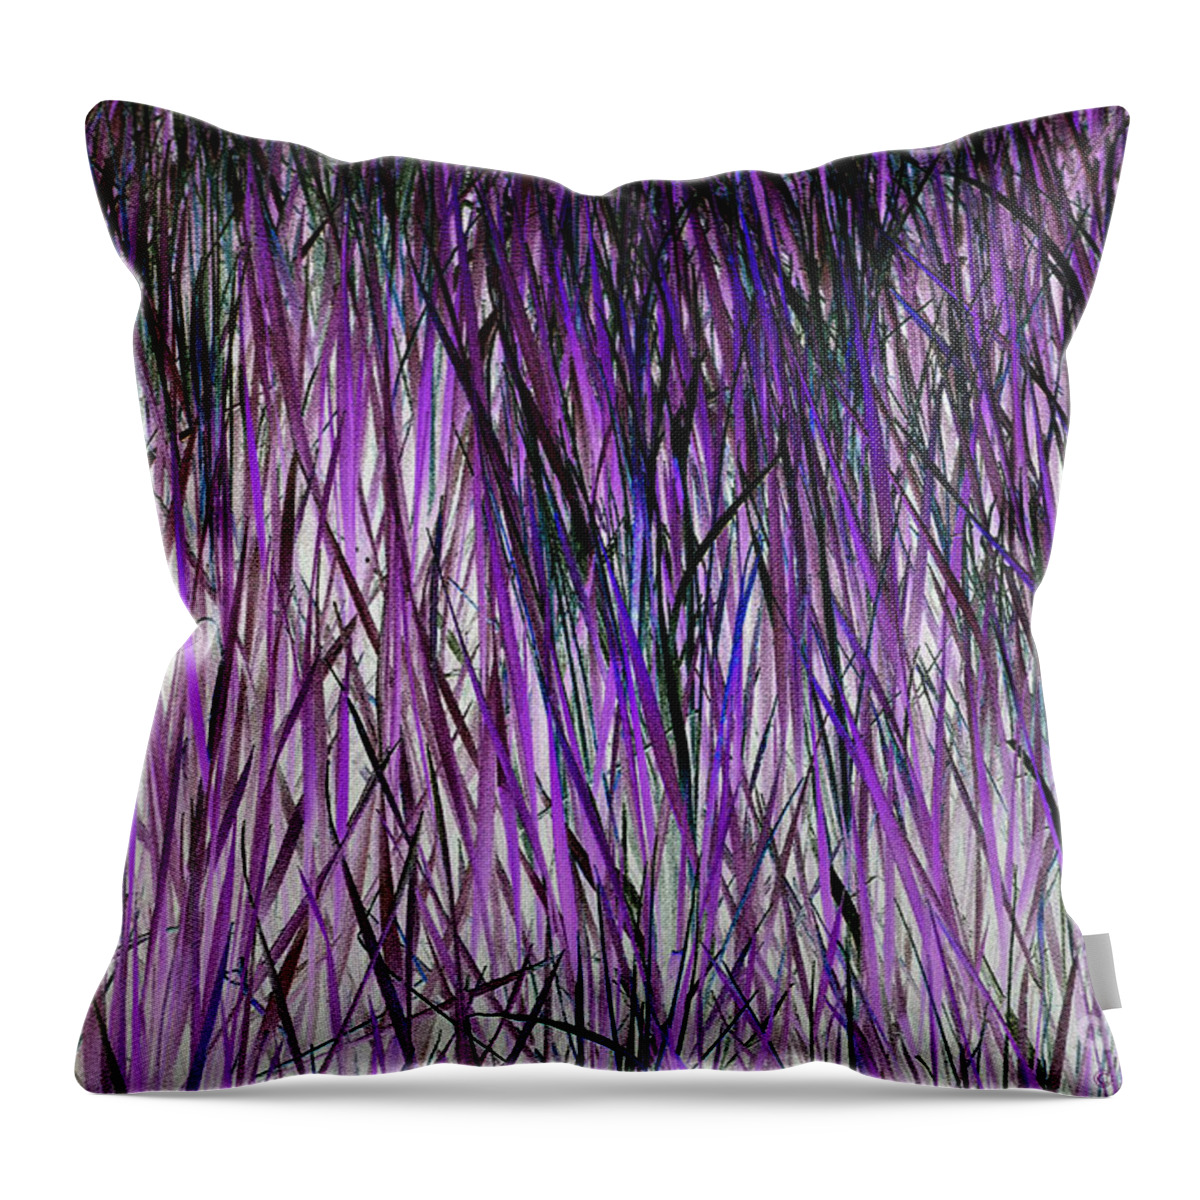 Pink Grass Throw Pillow featuring the digital art Flowering Grass of the Future by Afroditi Katsikis